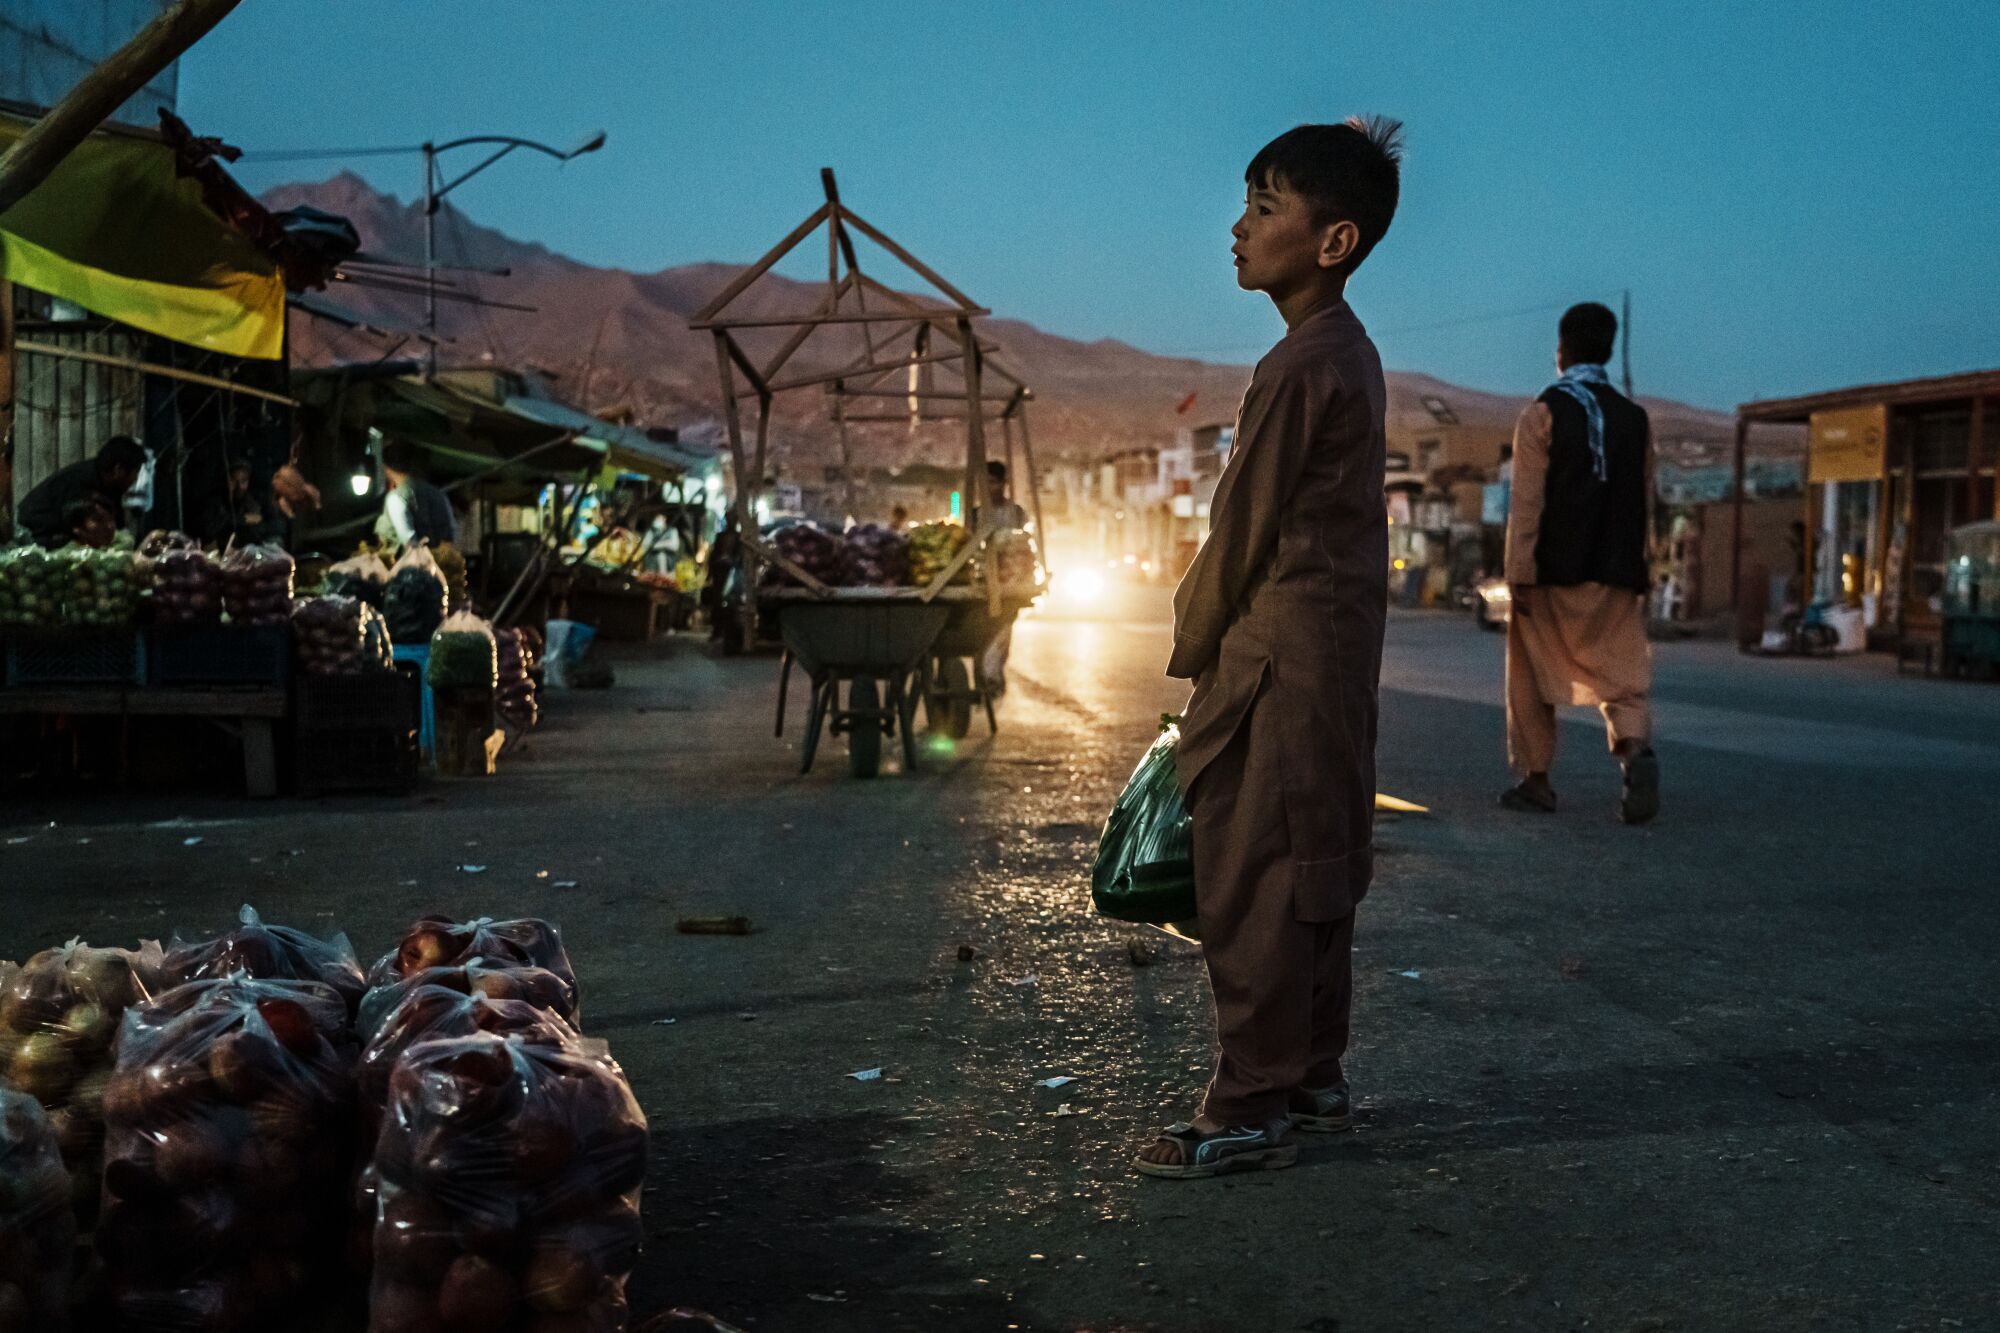  Afghans go about their evening on the main thoroughfare.   